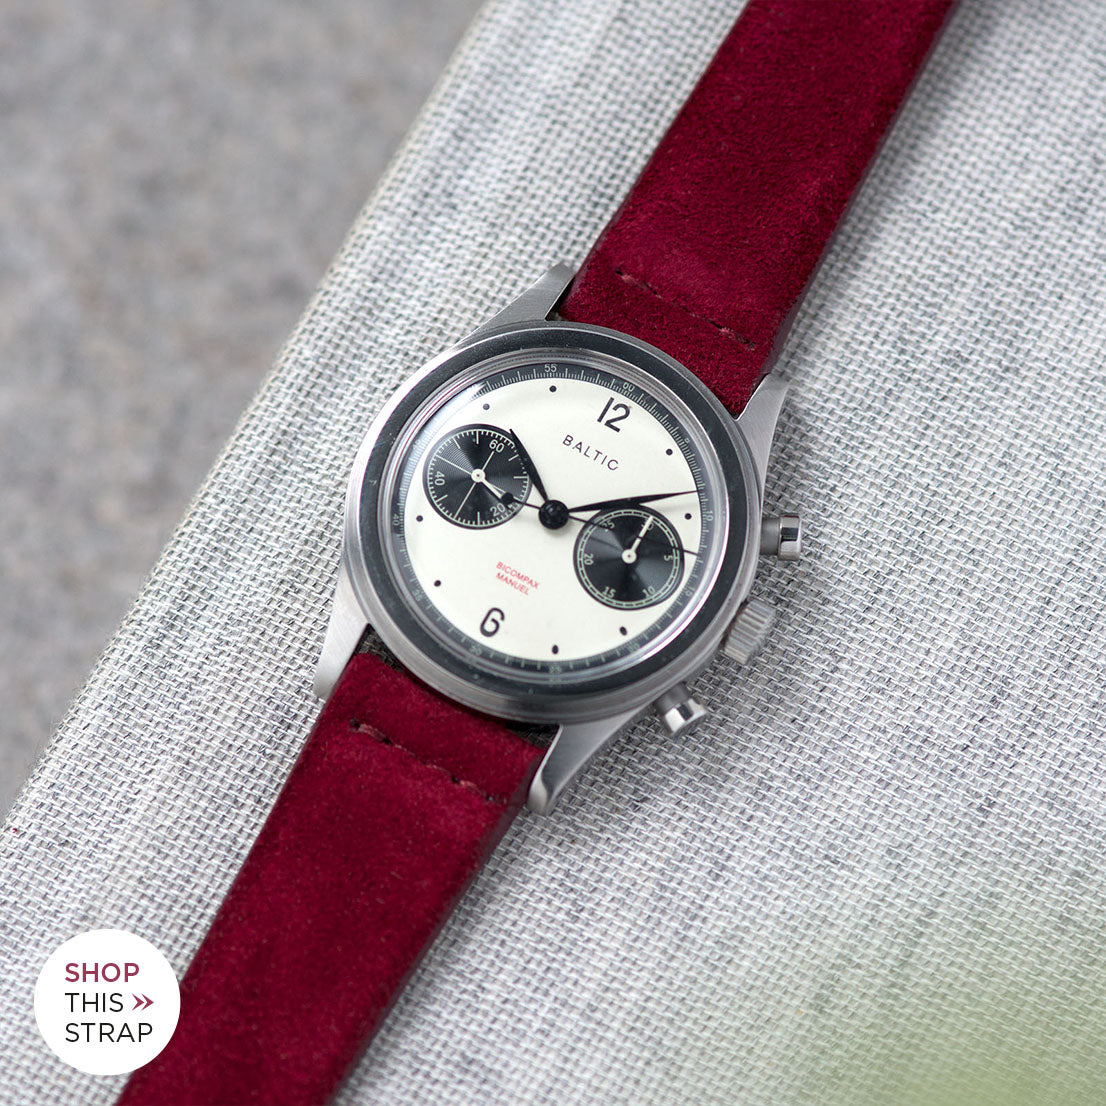 Bulang and Sons_Strap Guide_The Baltic-Chronograph-Panda-Limited-Edition_Burgundy Red Silky Suede Leather Watch Strap